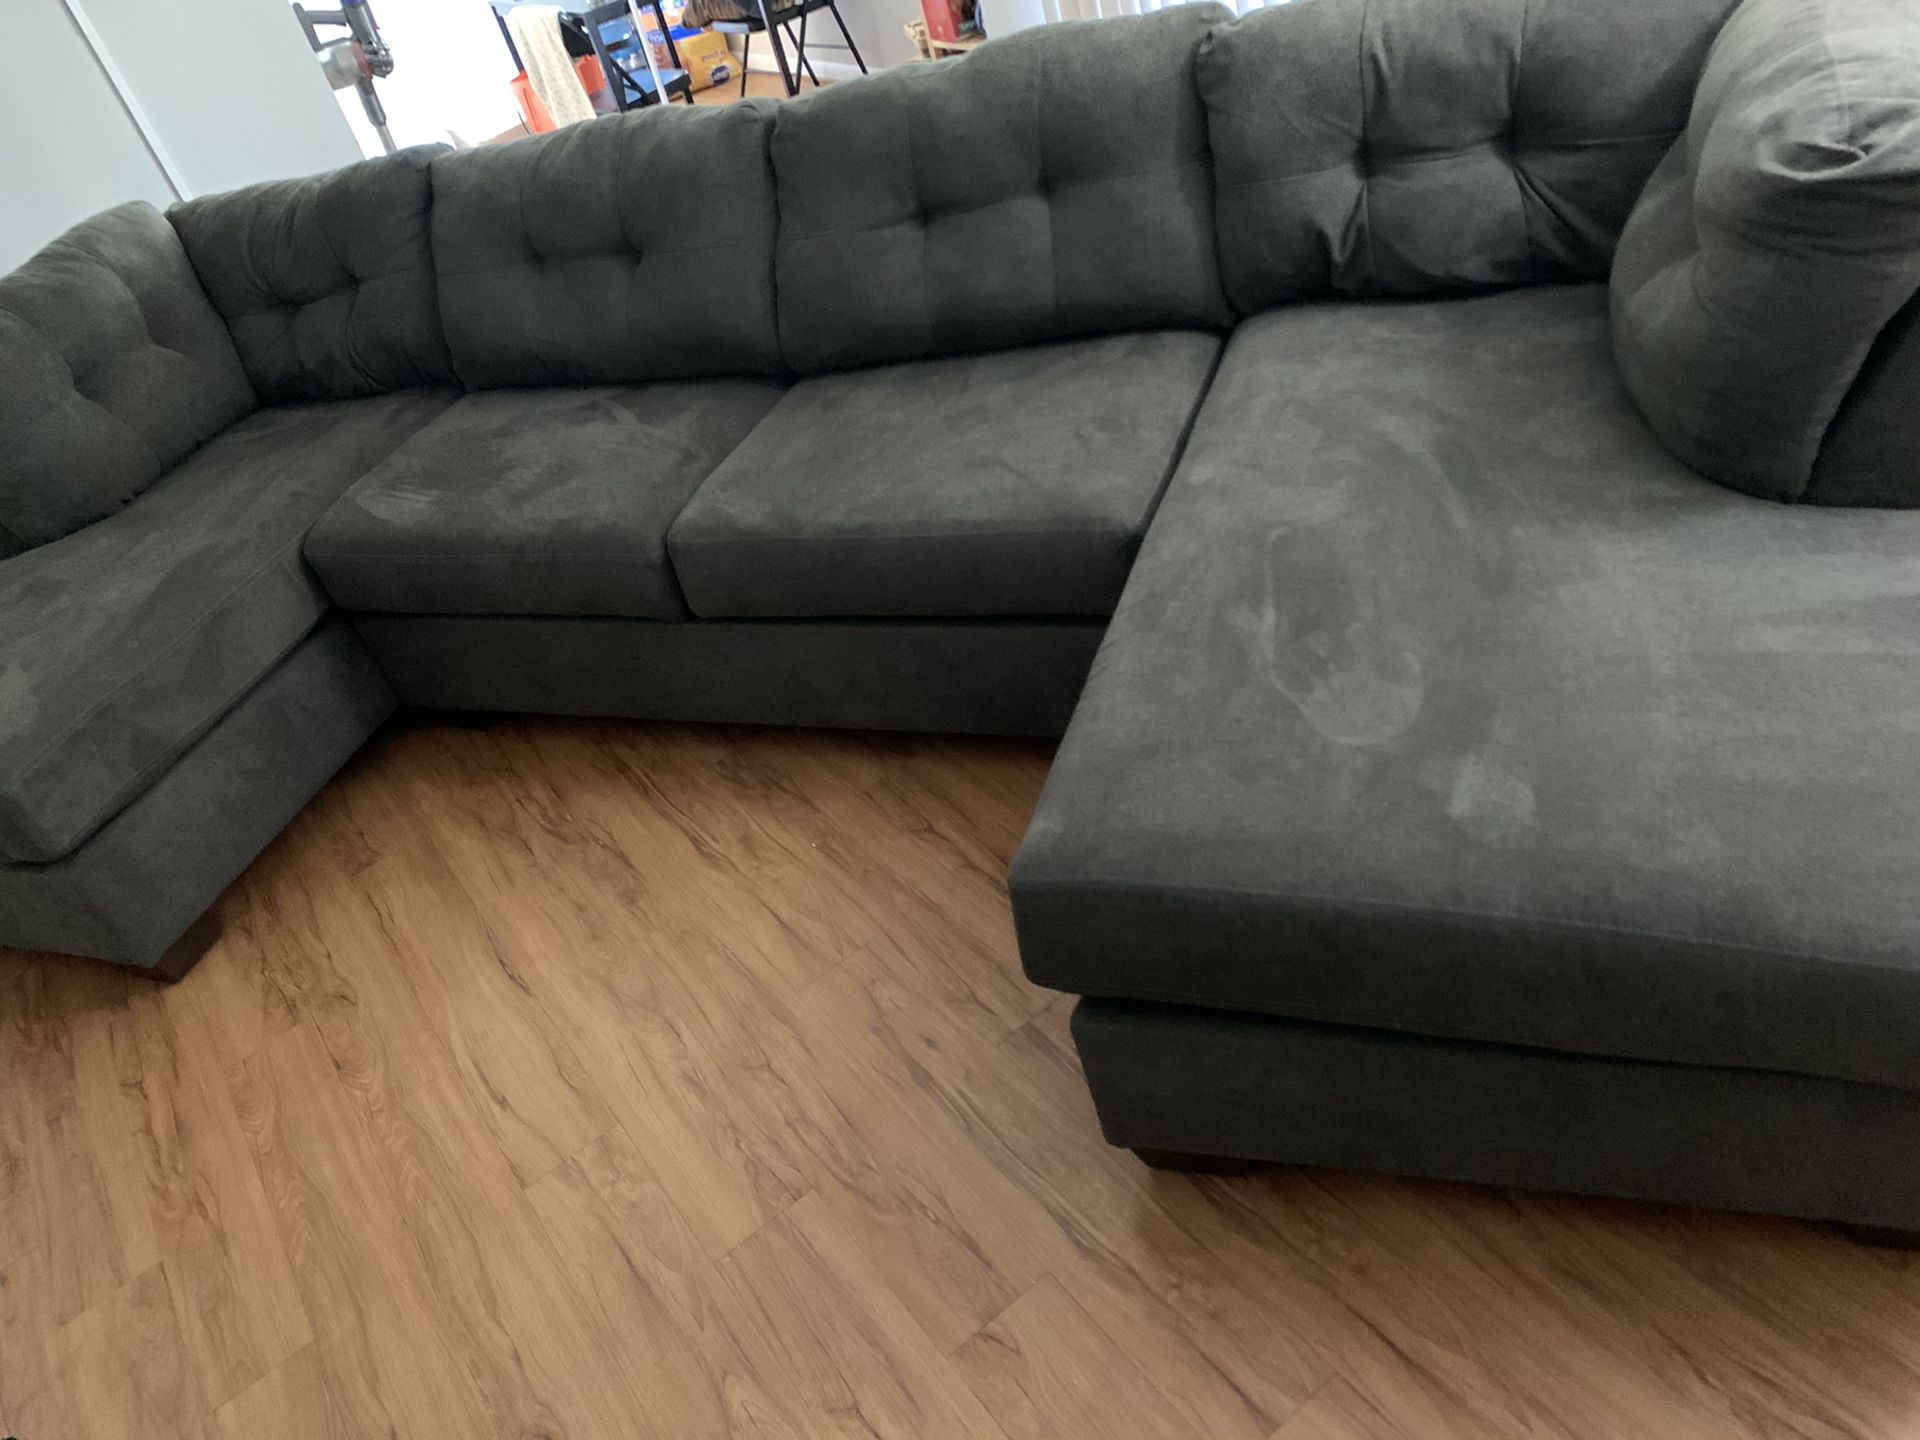 Huge sectional couch !!!!!